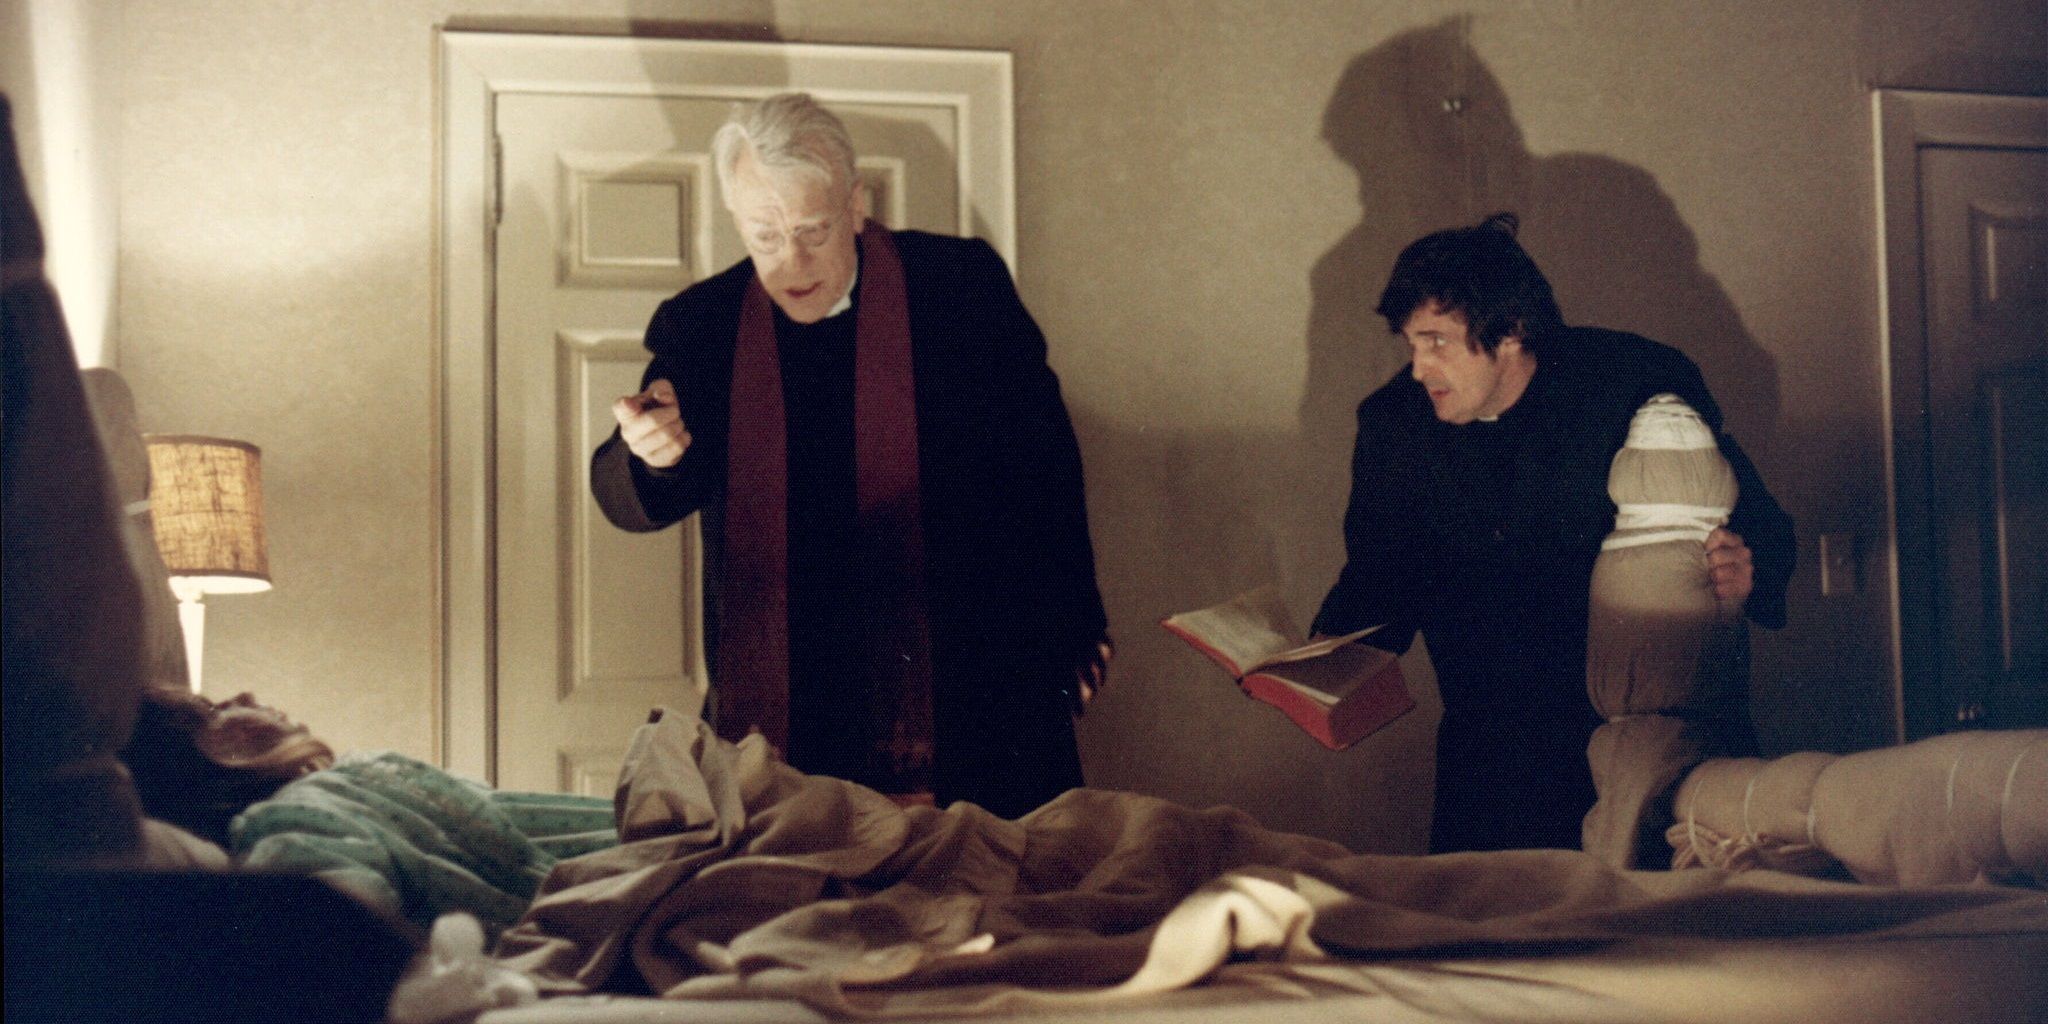 Fathers Merrin and Karras begin the exorcism in The Exorcist